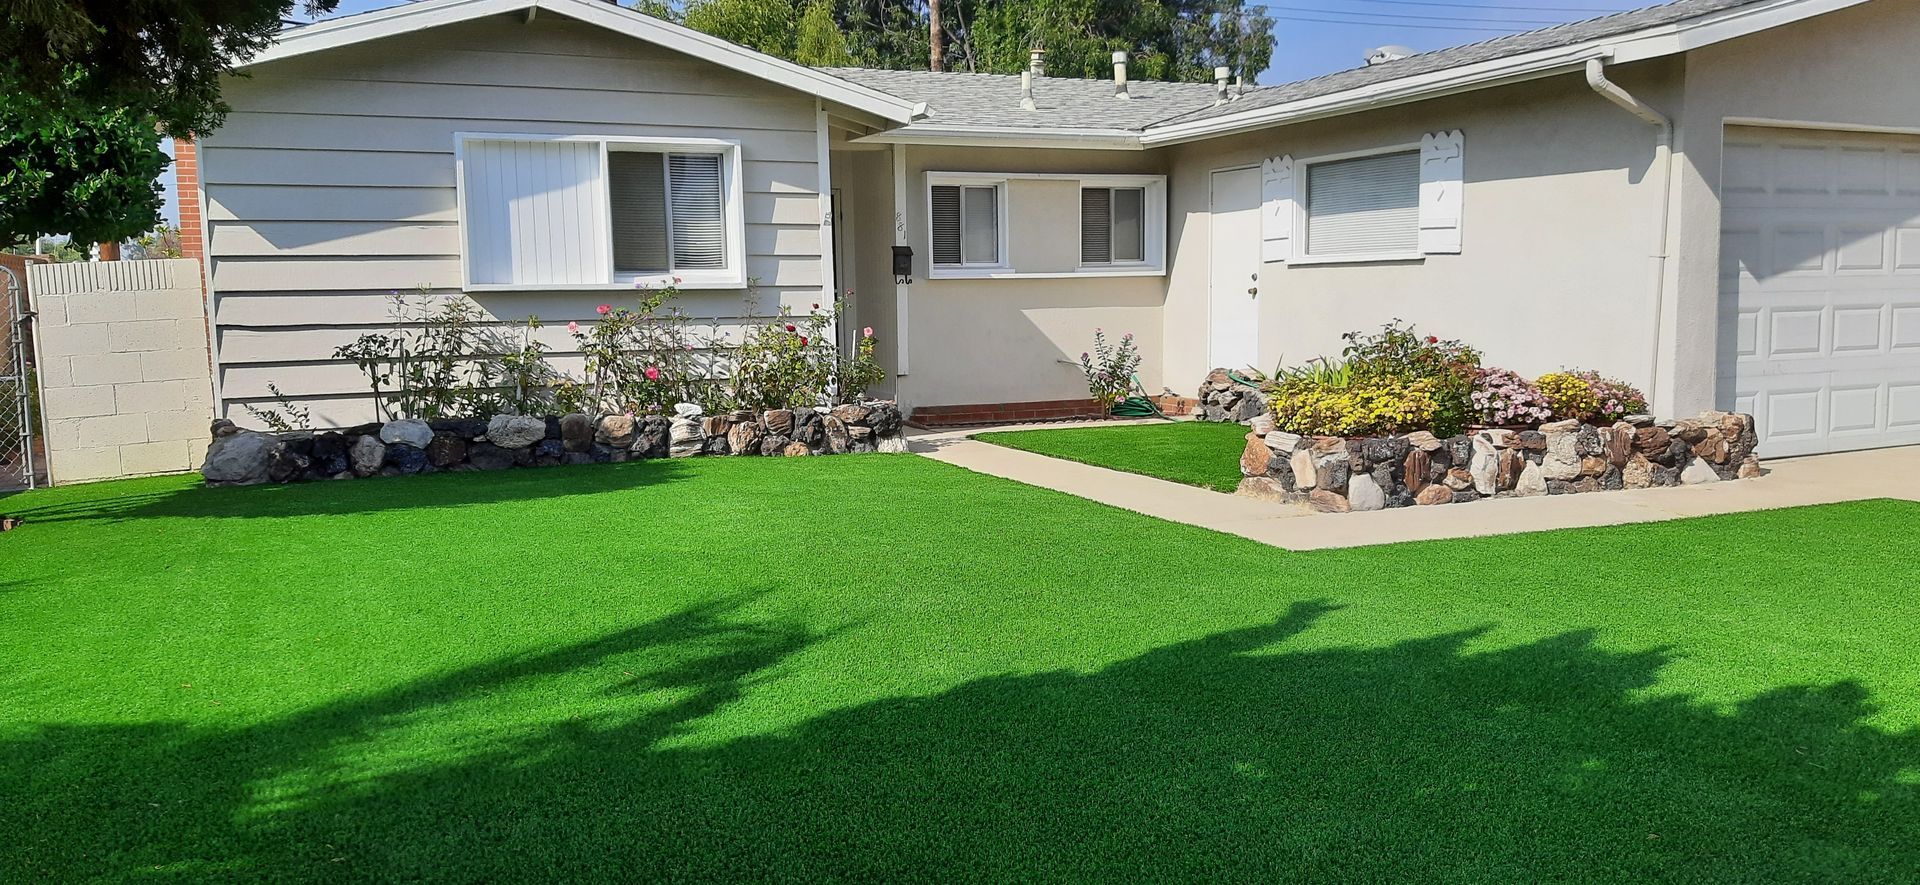 artificial grass in front yard